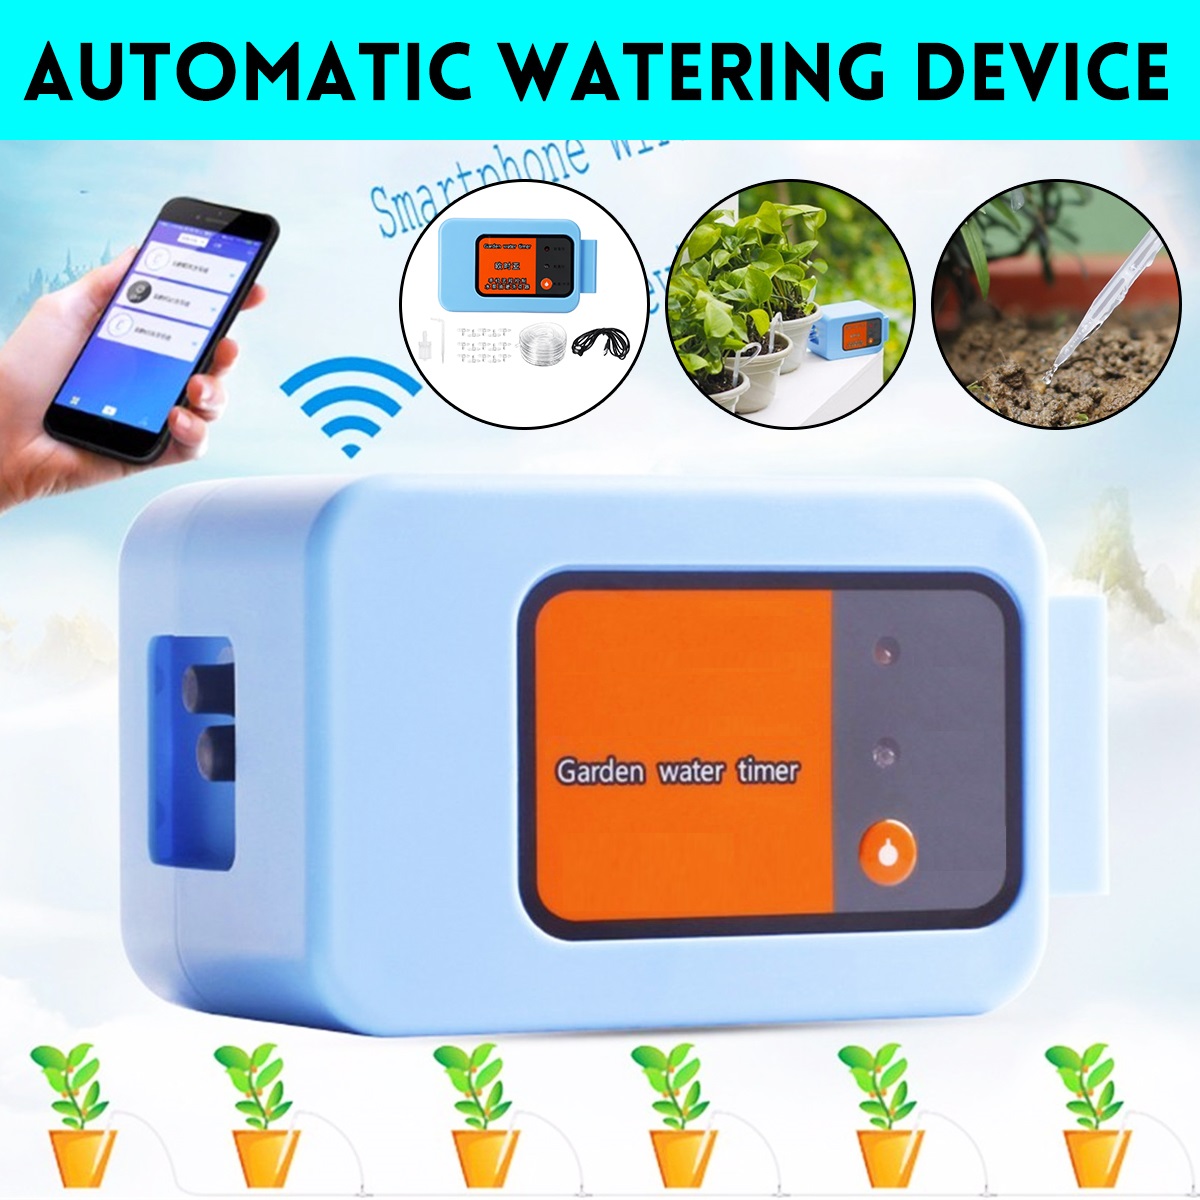 Automatic-Watering-Device-Phone-Control-Irrigation-System-Irrigation-Computer-Irrigation-Timer-with--1580072-1